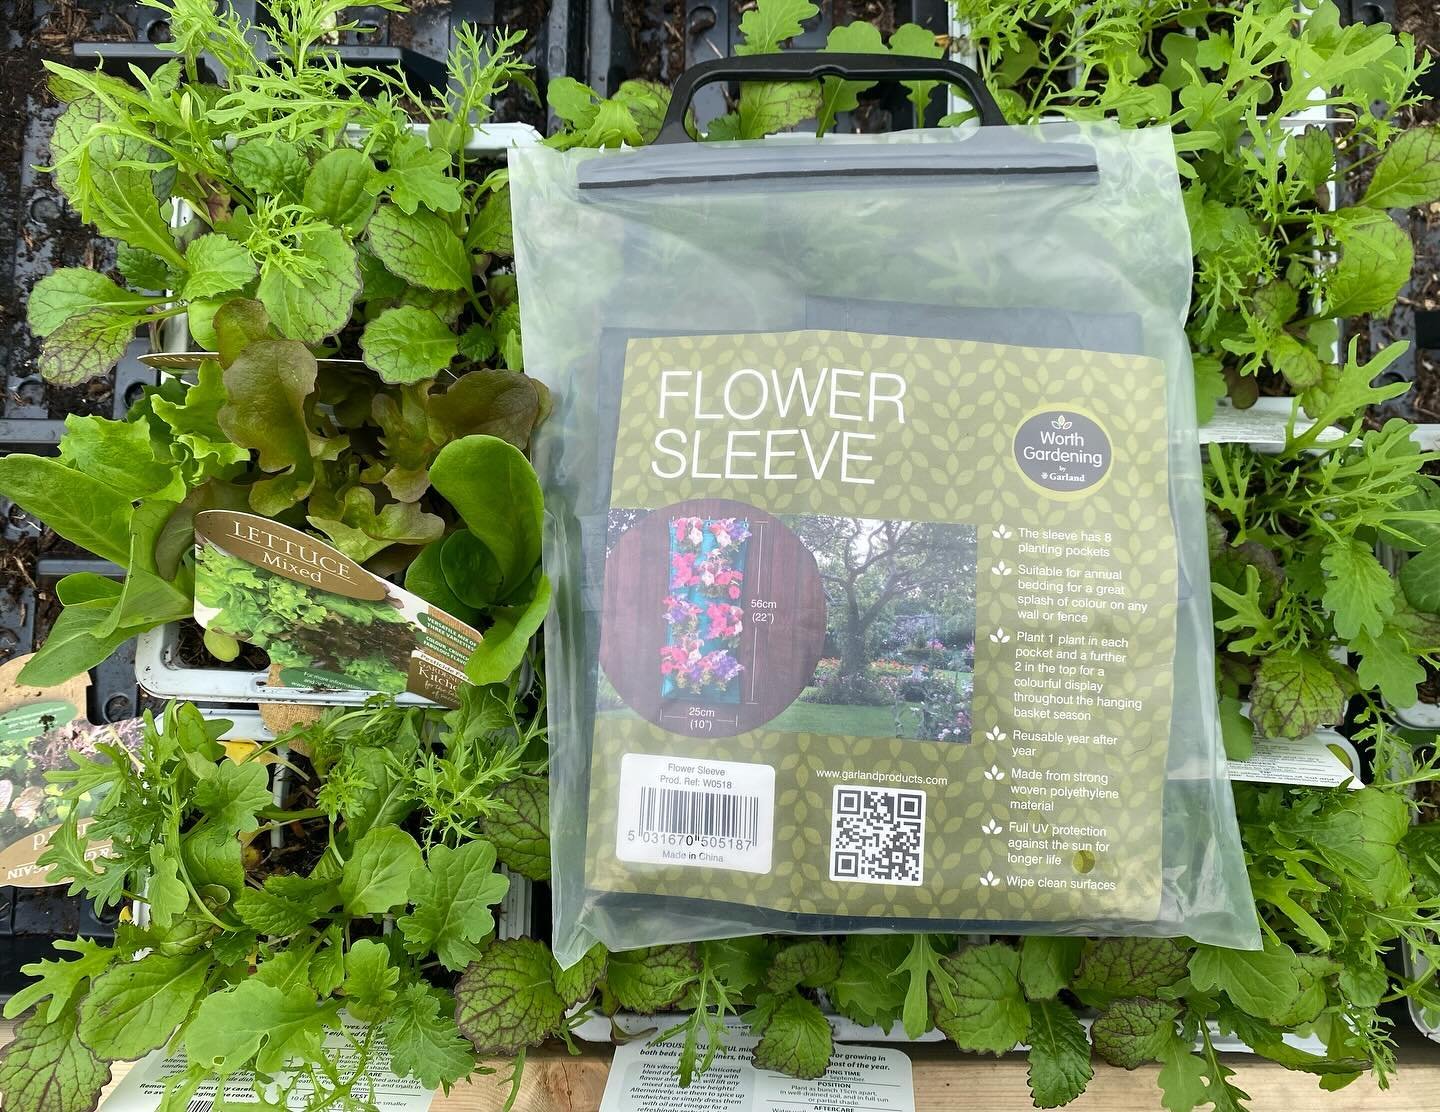 If you&rsquo;re short on space but want to grow your own delicious salad leaves you can always use a flower sleeve and have a wonderful vertical salad garden 😃
.
.
.
.
#knightsgardencentres #woldingham #chelsham #growyourown